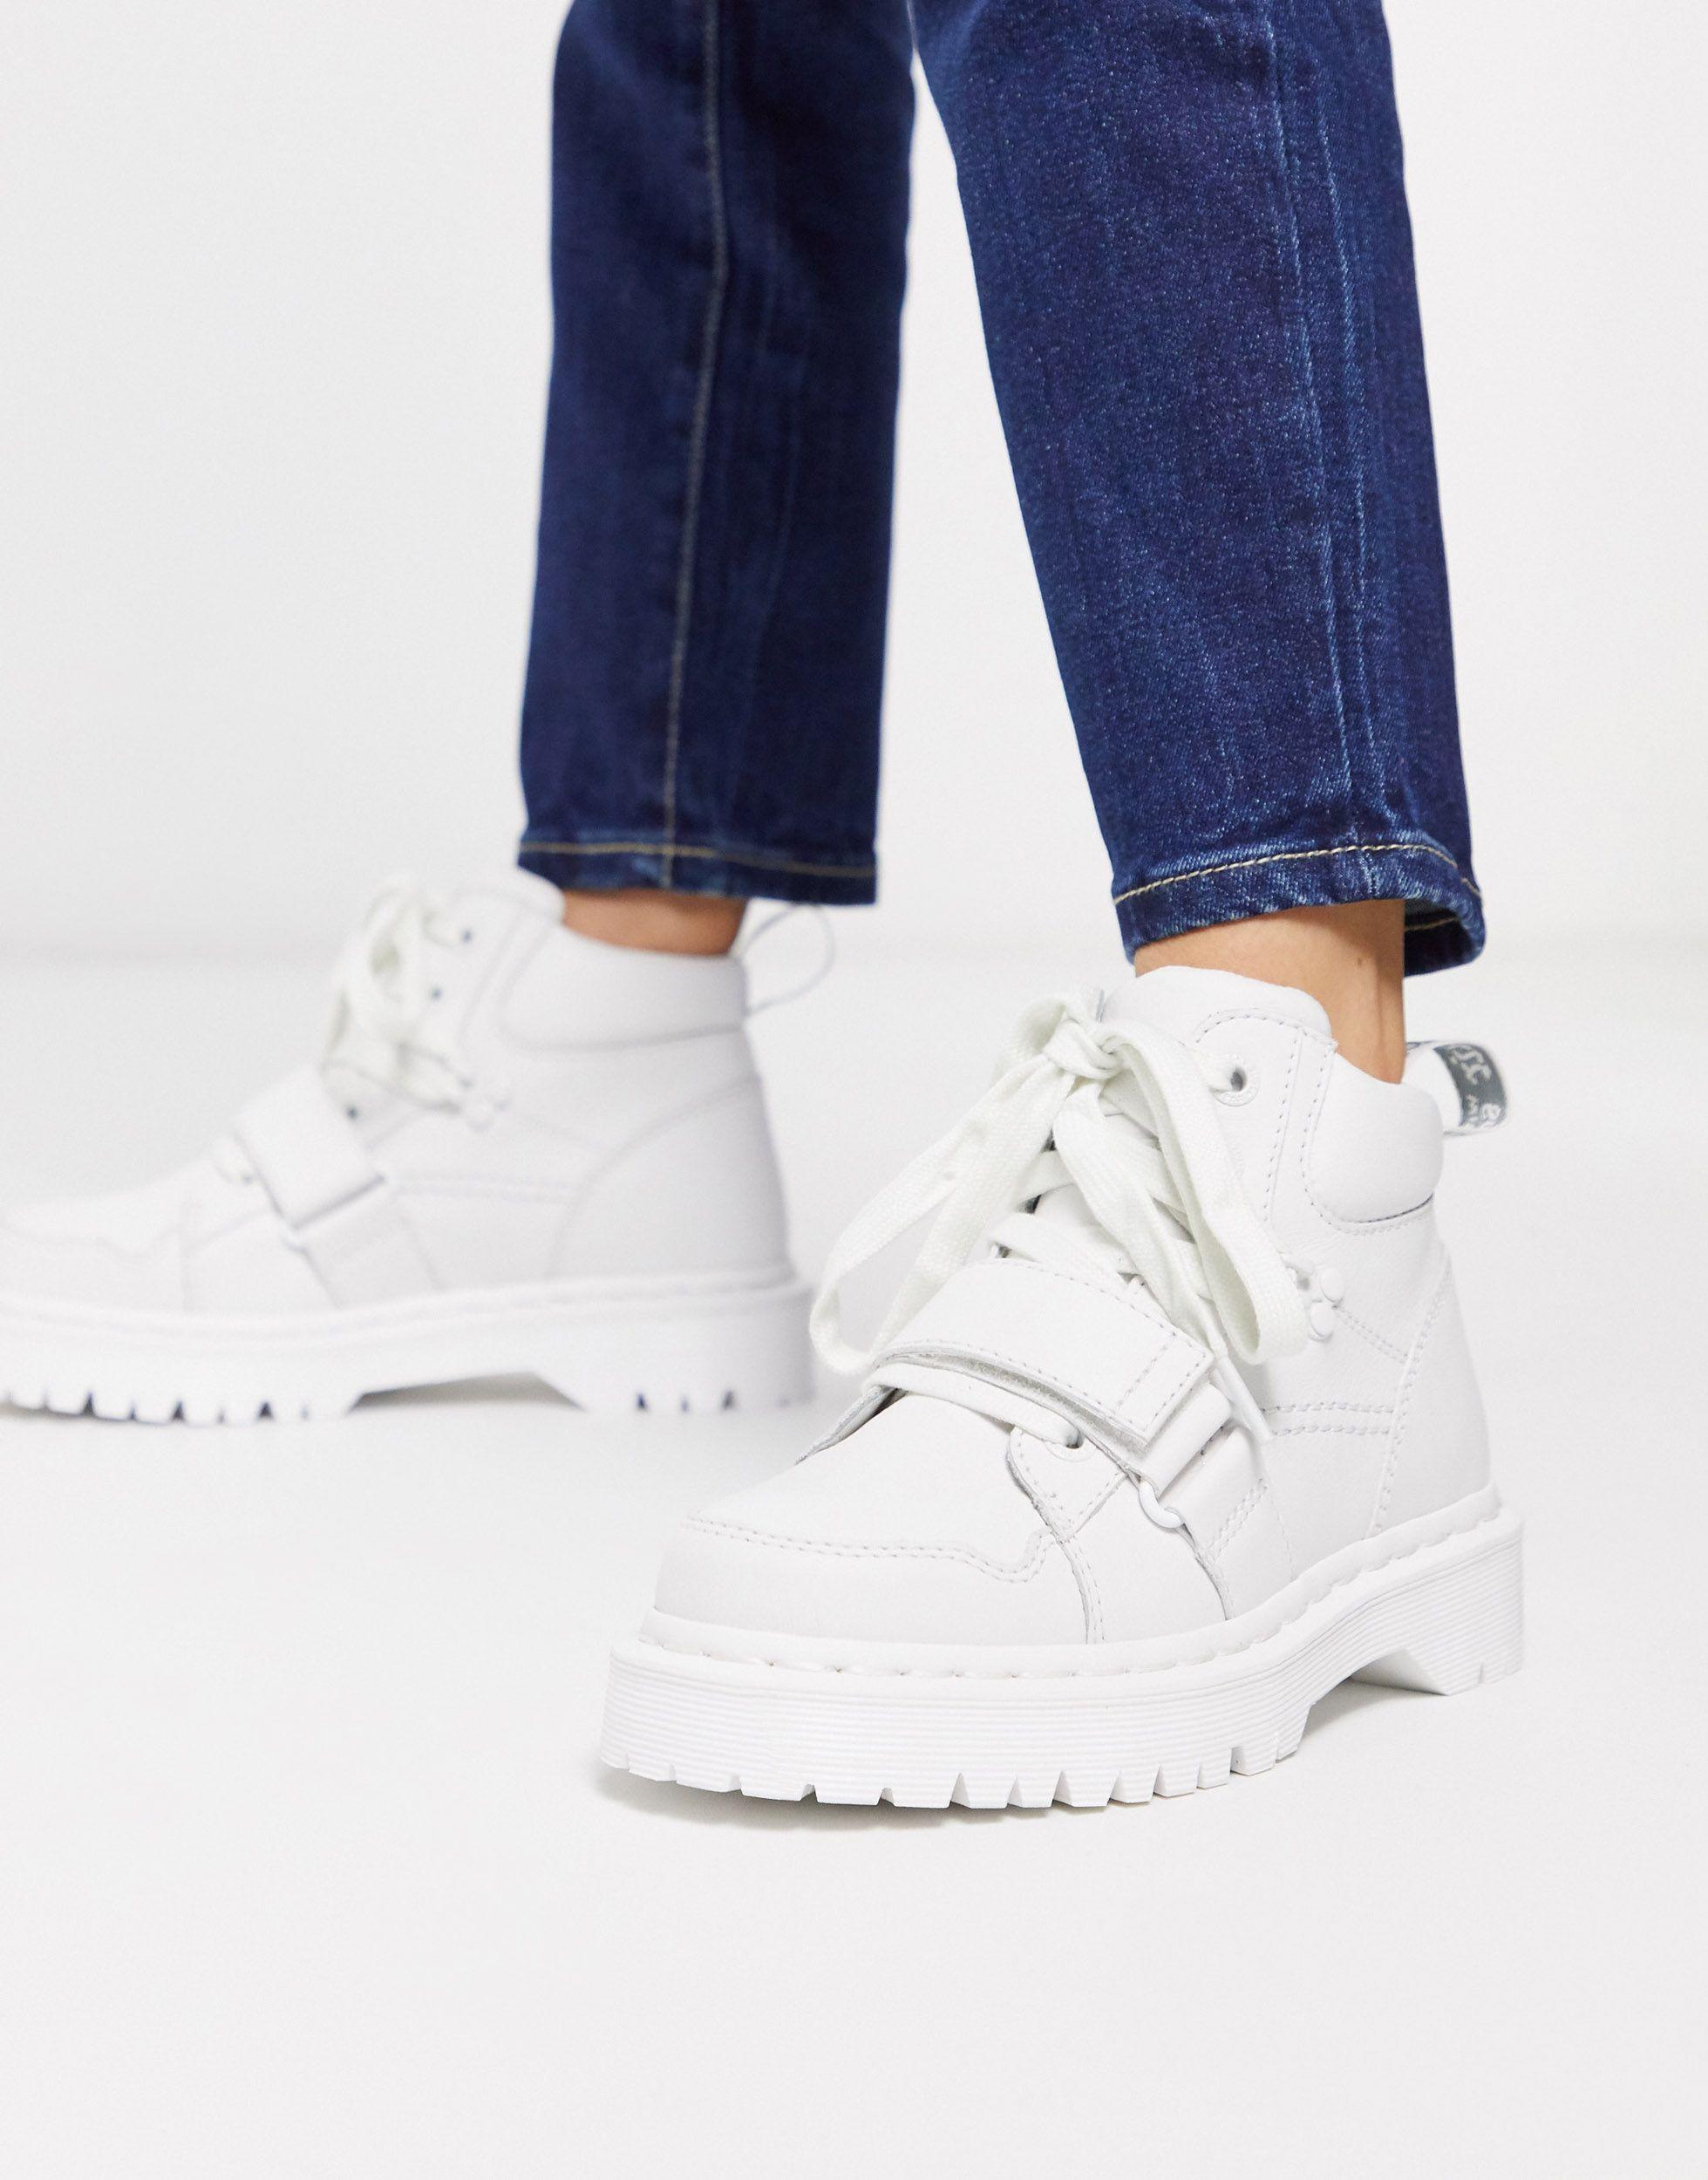 Dr. Martens Leather Dr. Martens Zuma Ii Womens Optical White Boots | Lyst